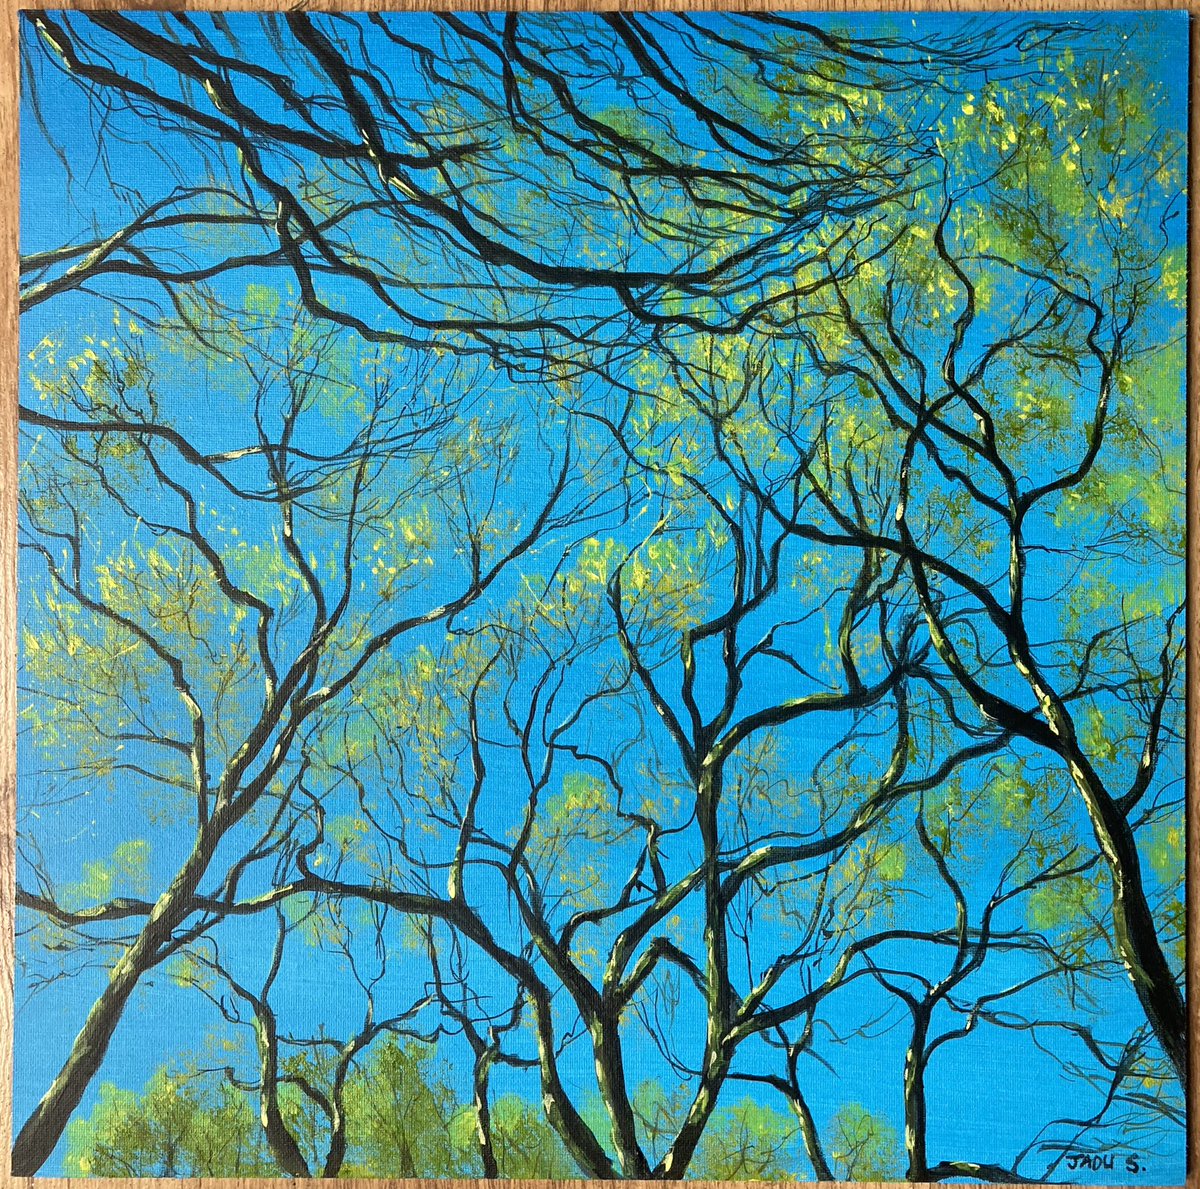 Latest work ‘Look Up’ inspired by walks in the spring - just need some warmth in the air now! Acrylic on canvas board #spring #trees #britishwoodland #woodland #originalart